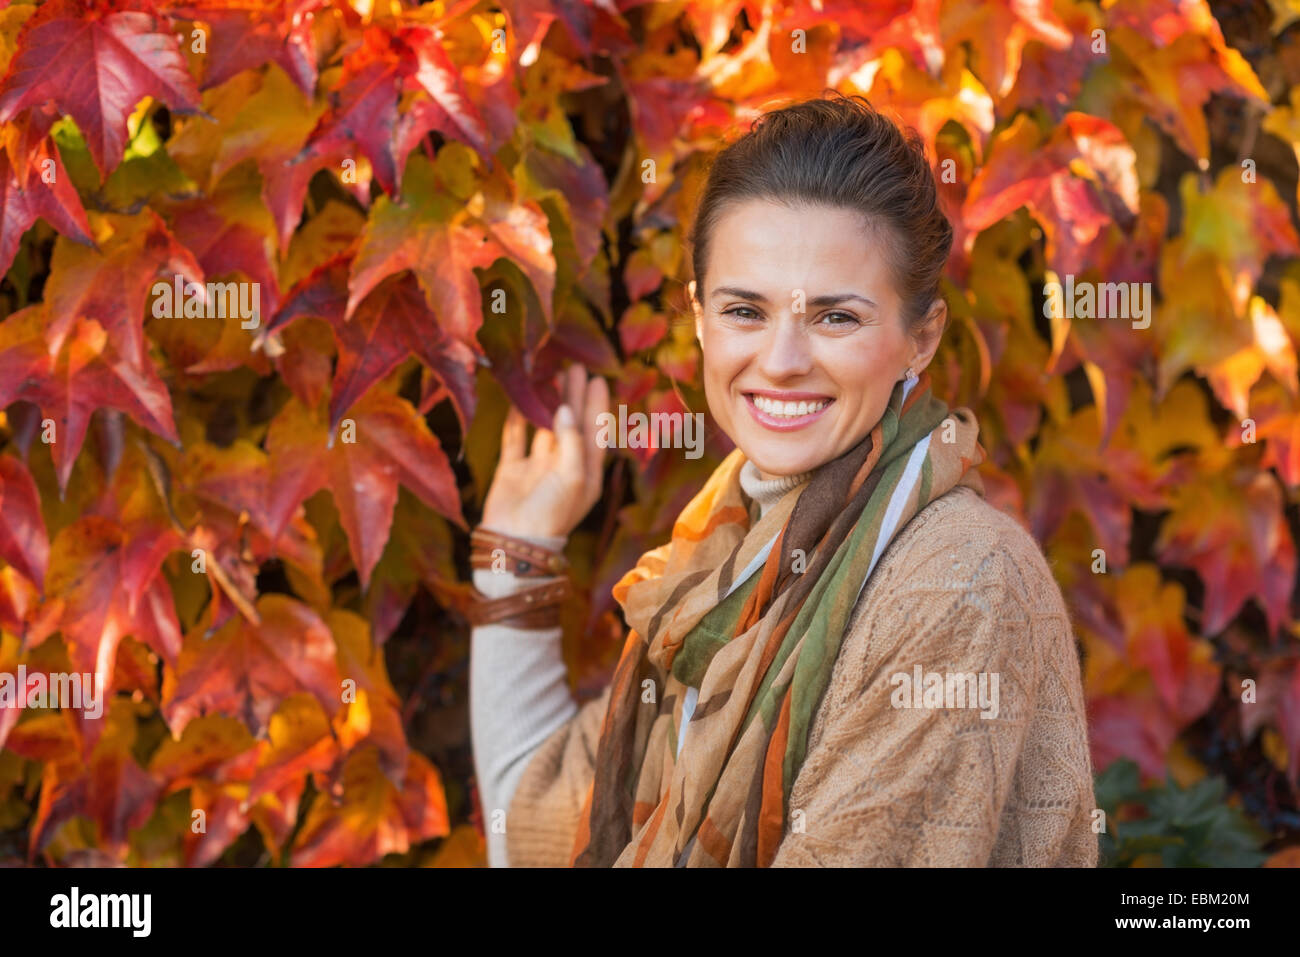 Portrait of happy young woman in front of autumn foliage Stock Photo